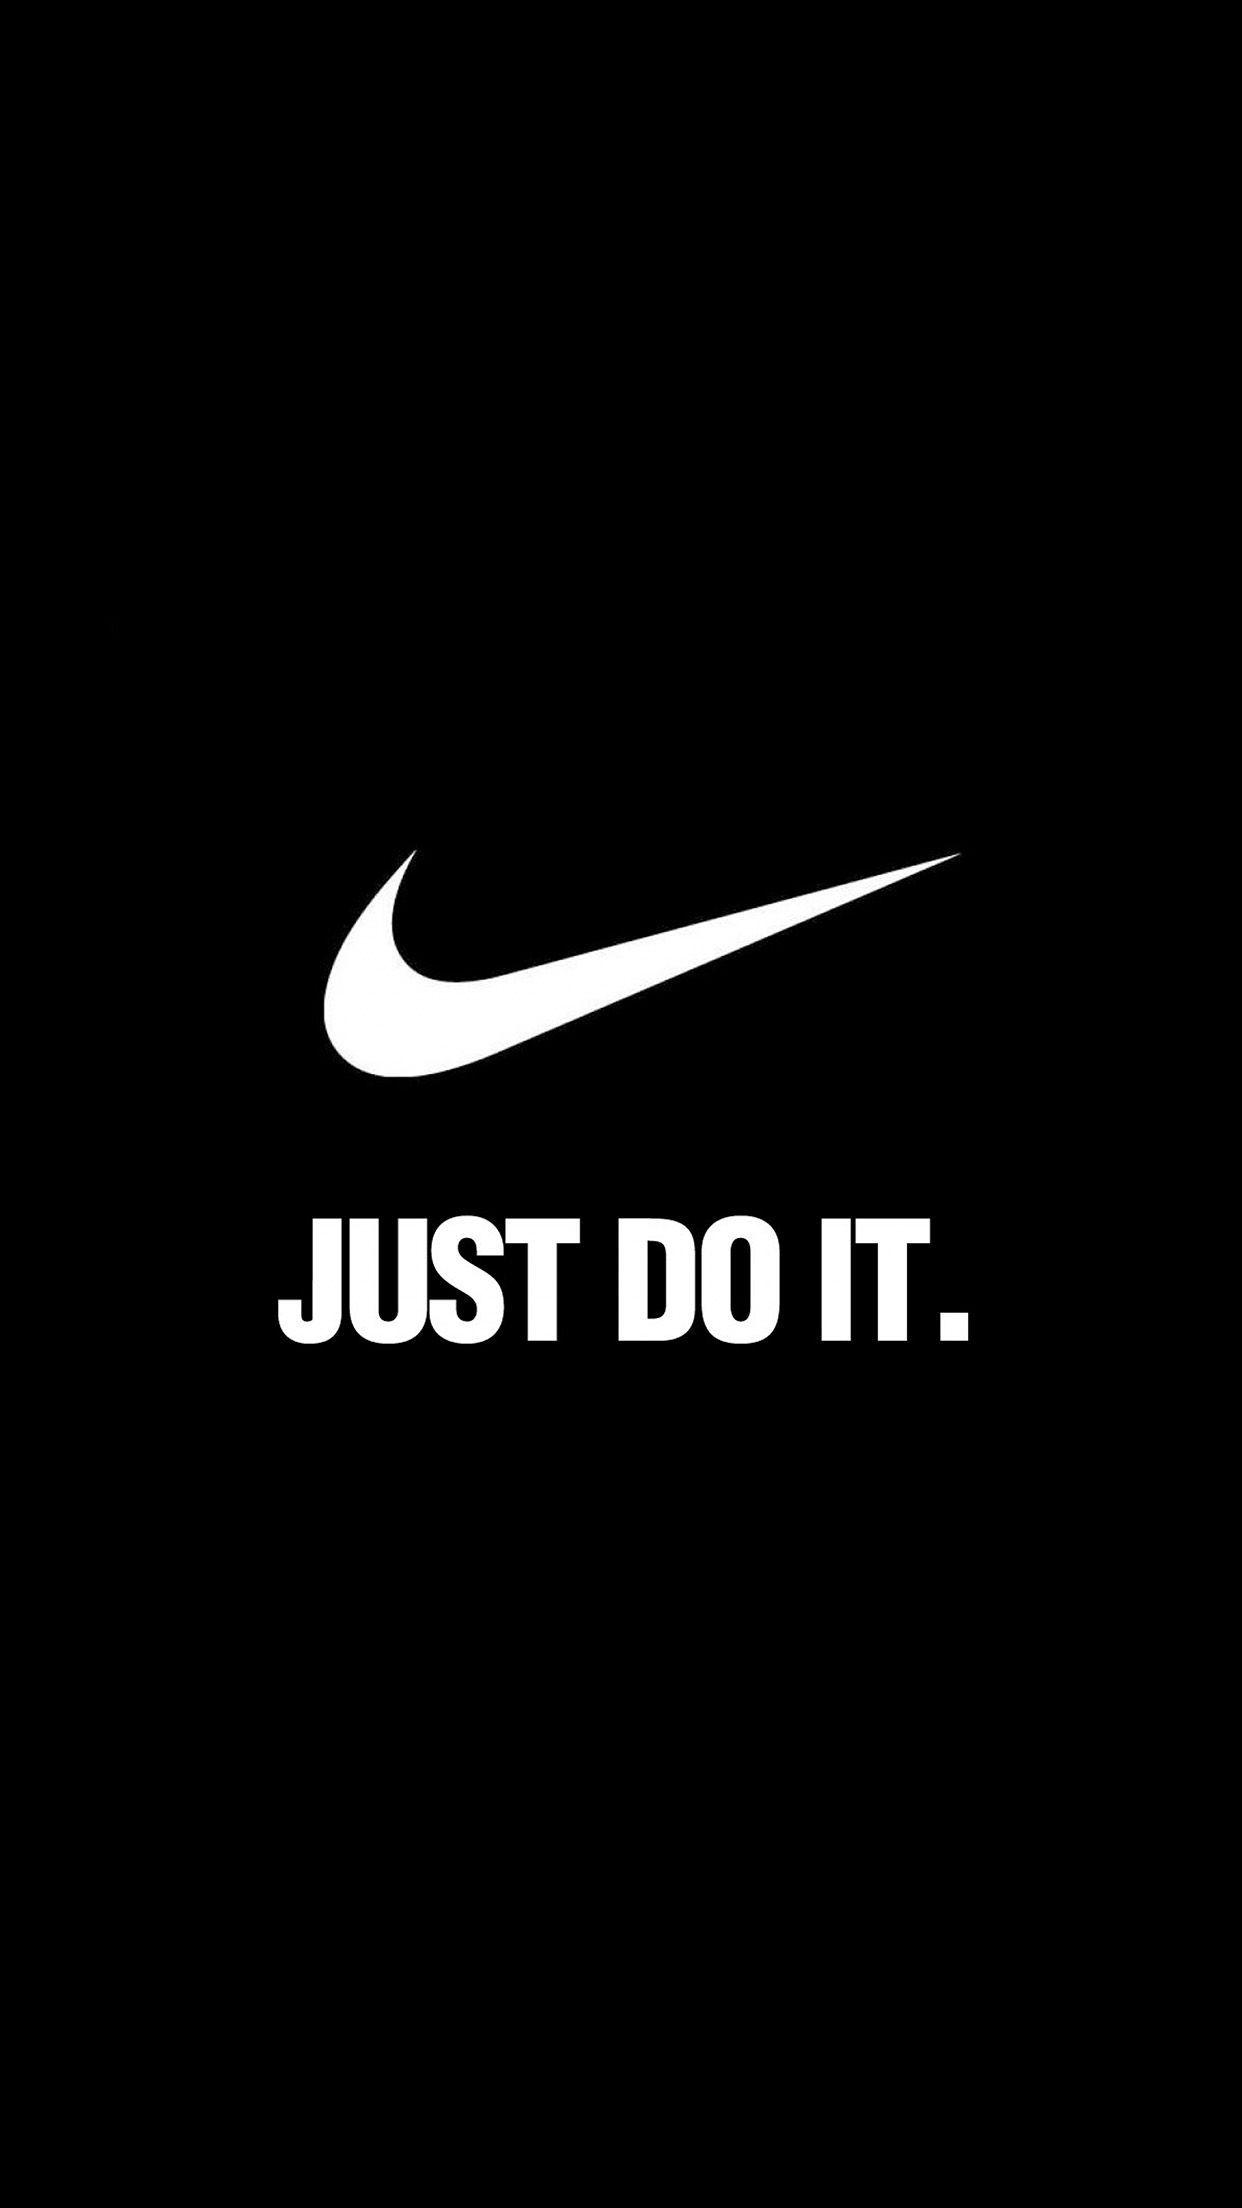 Nike Black and White Logo - ↑↑TAP AND GET THE FREE APP! Logo Nike Brand Just Do It Motivation ...